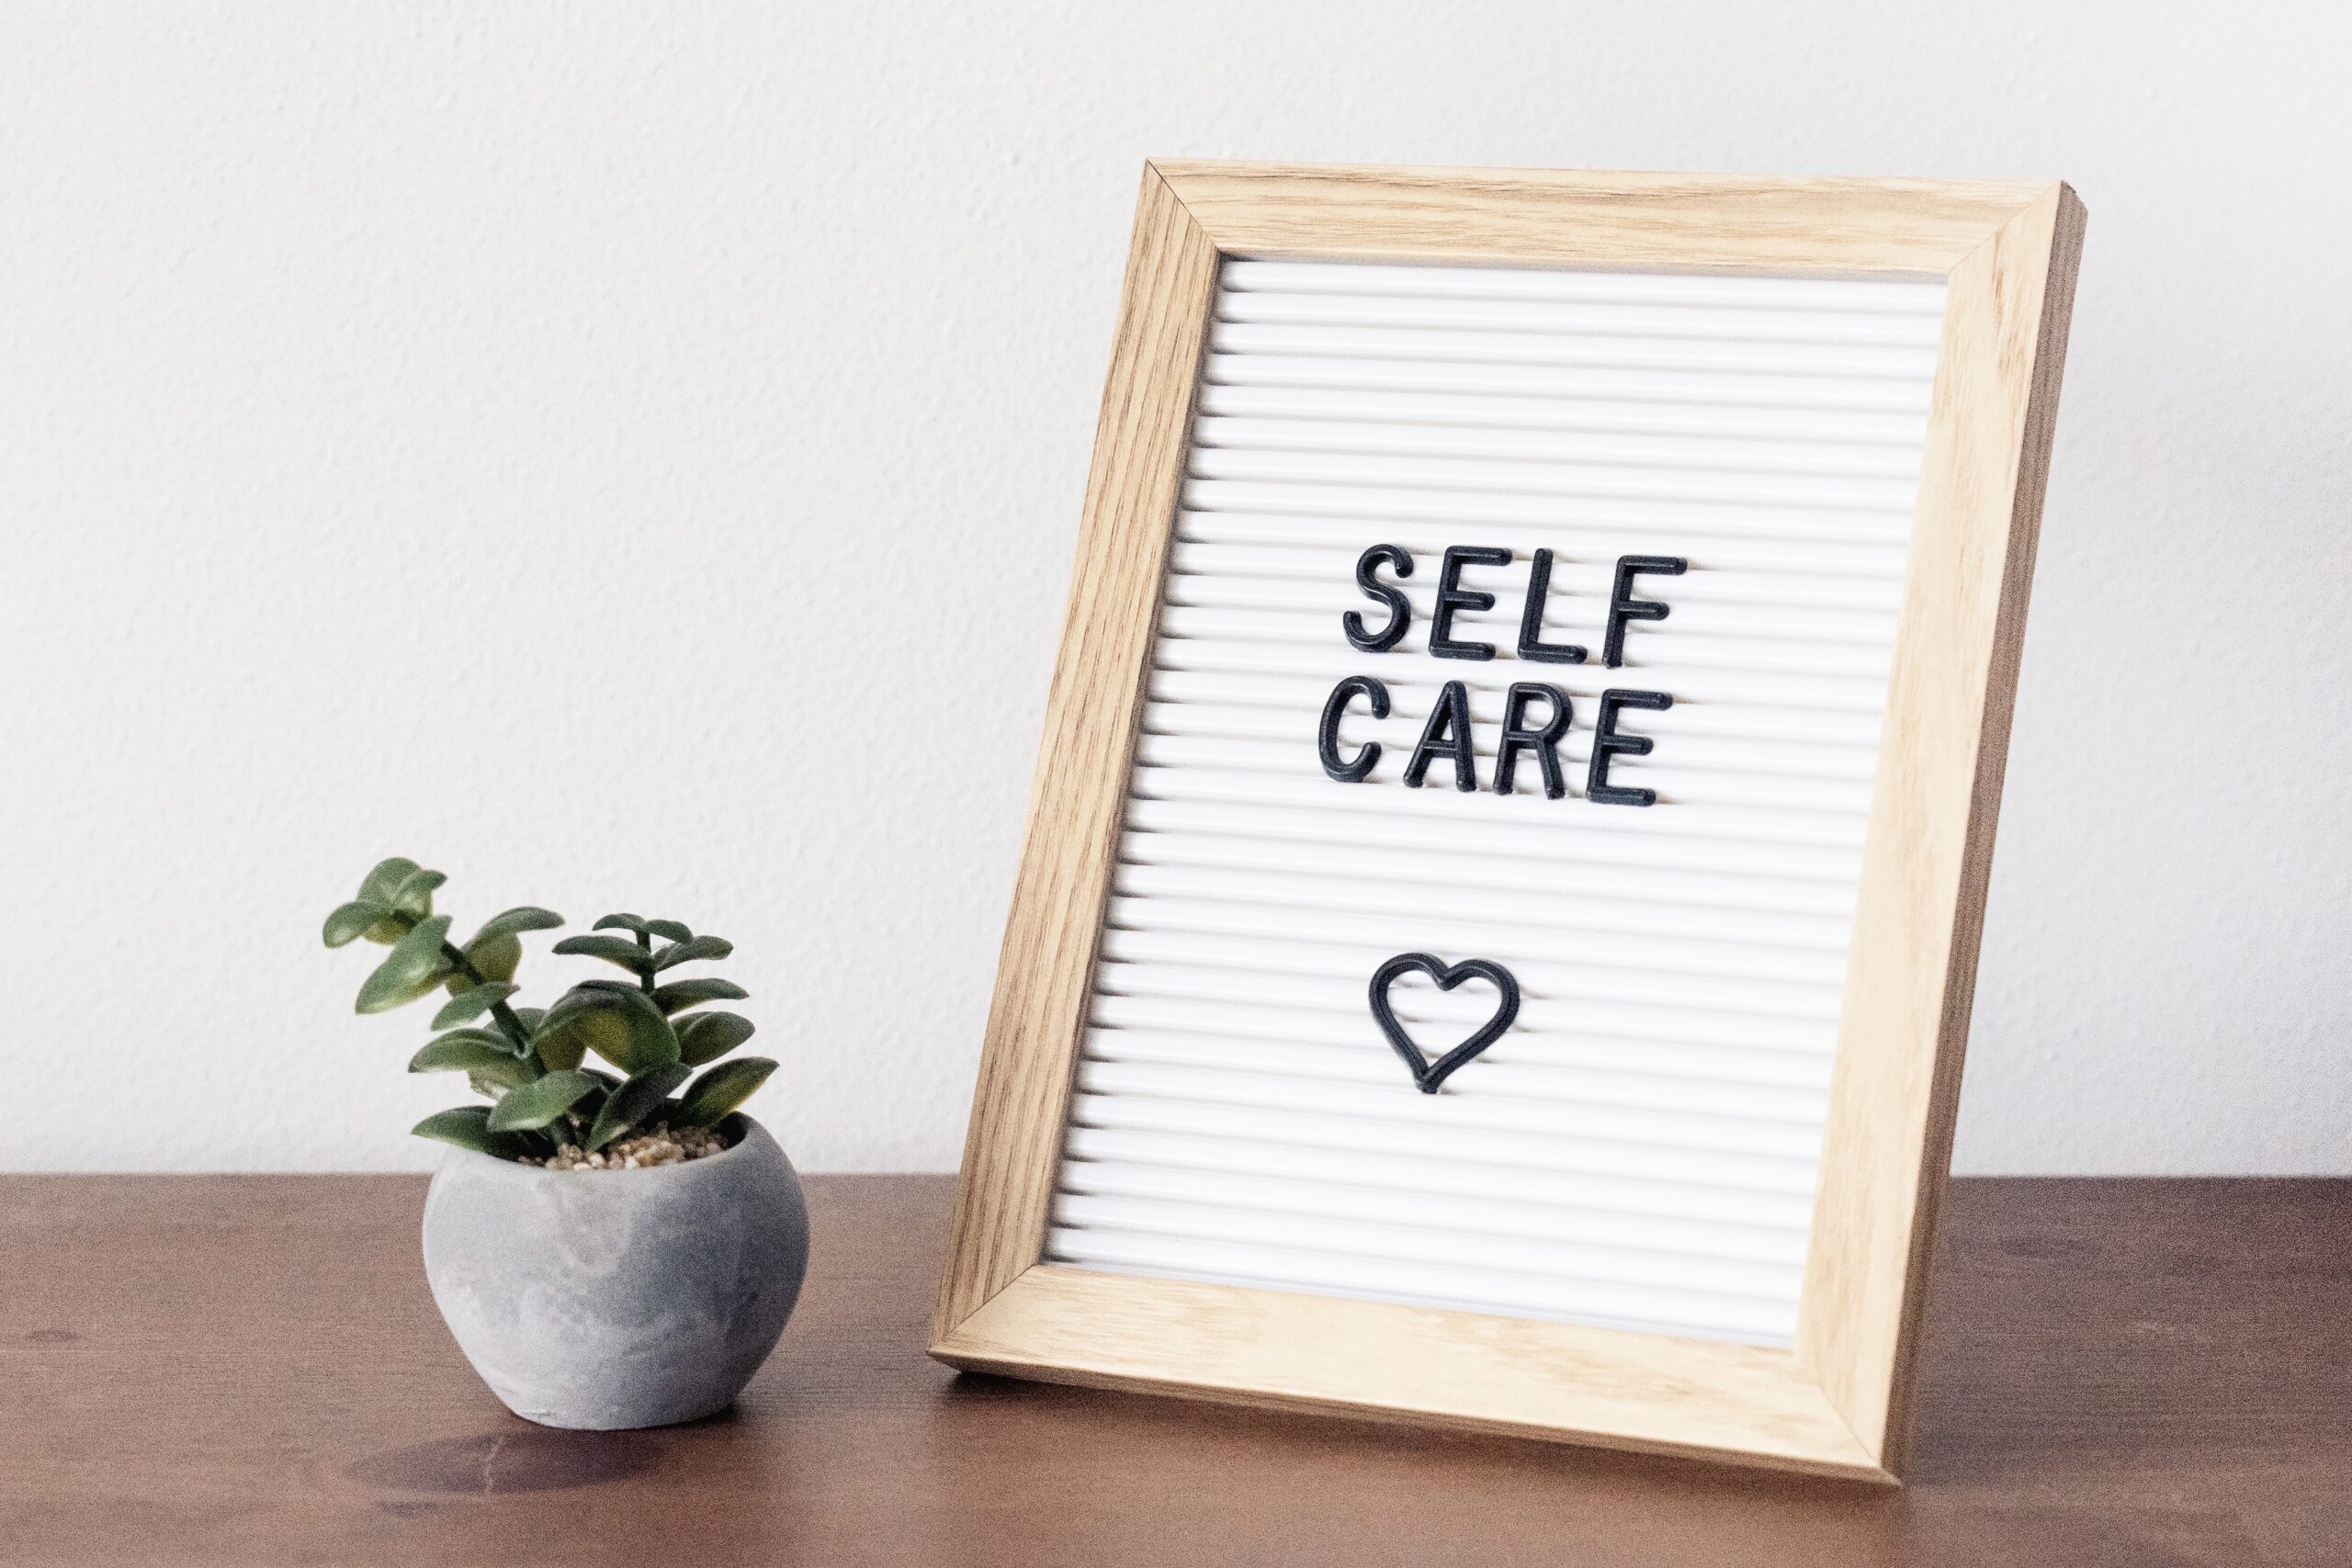 Self-Care Tips for the New Year